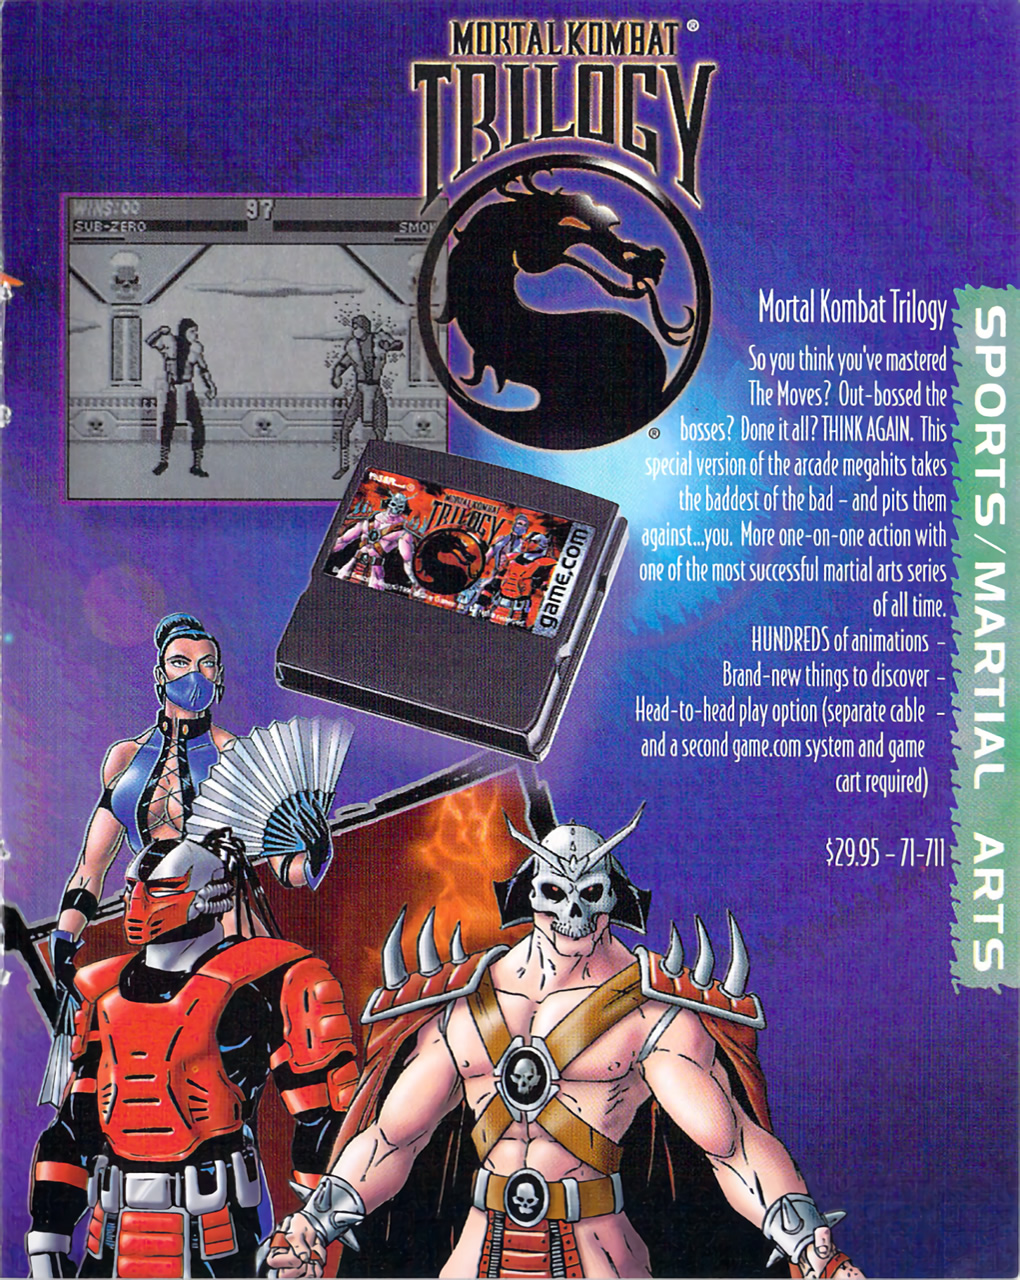 PlayStation] - Mortal Kombat Trilogy - All Fatalities, Animalities,  Brutalities and Friendships 